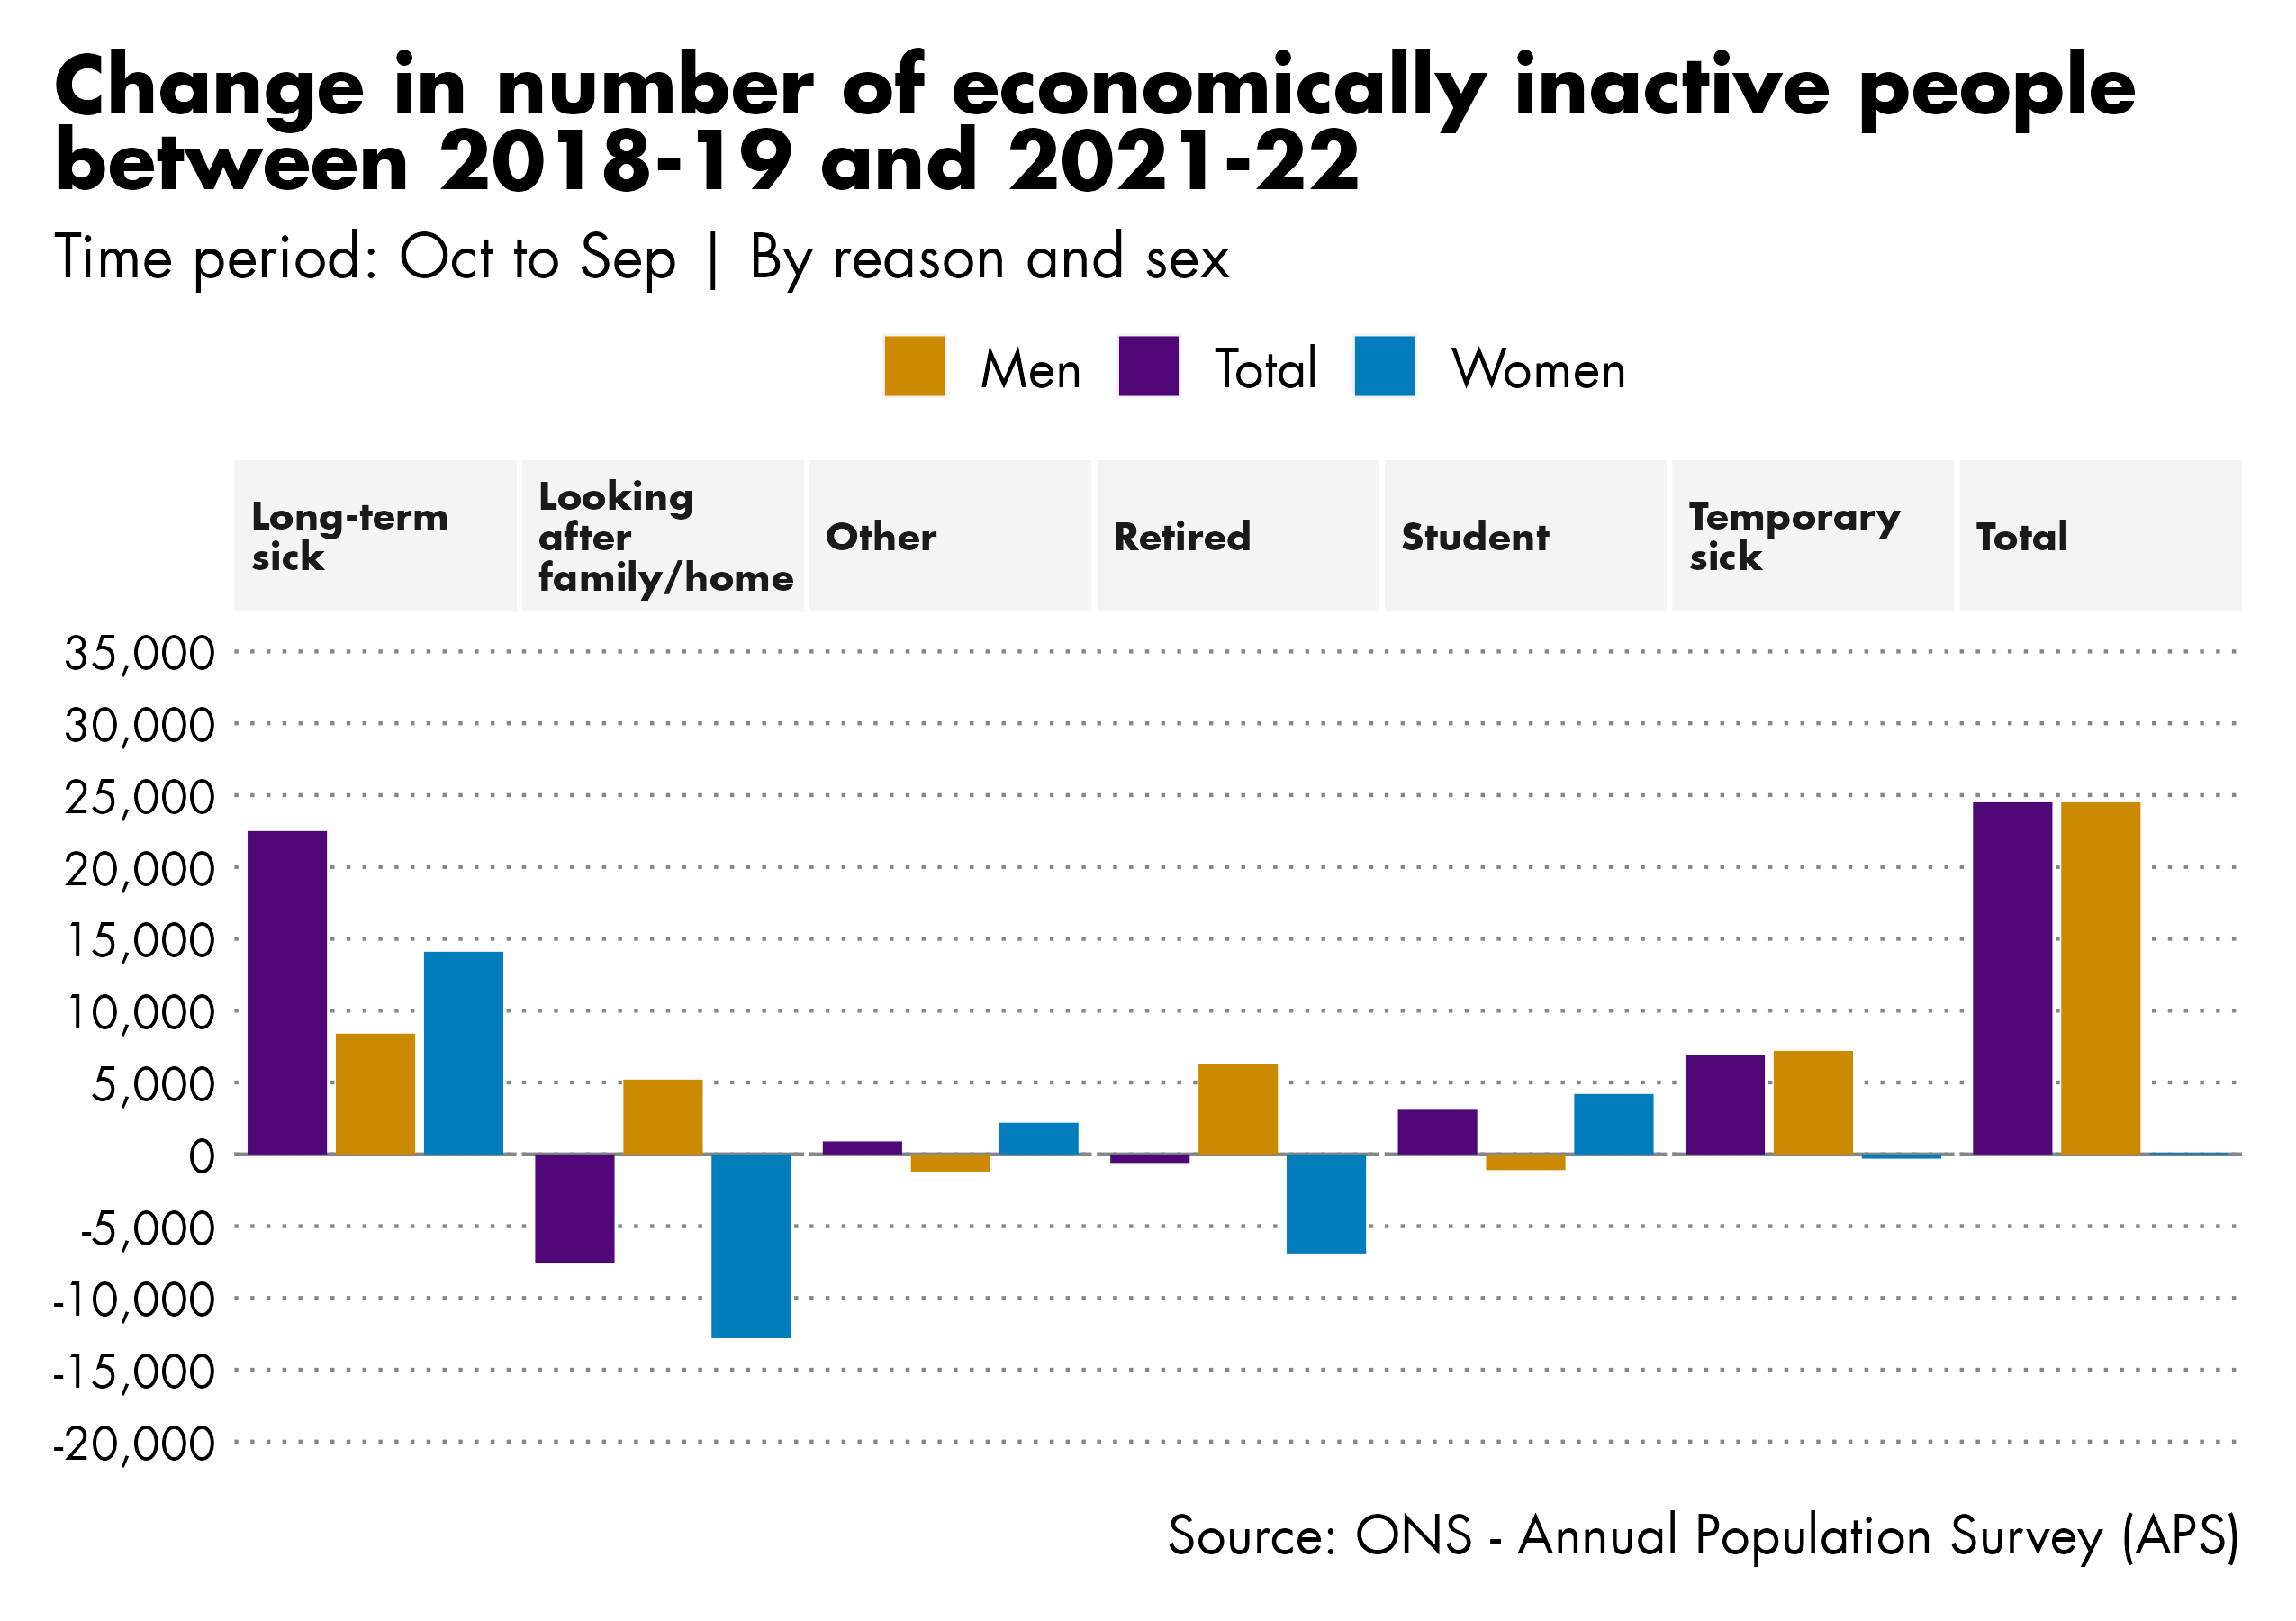 Figure showing the change in number of economically inactive people between October and September 2018-19 and October and September 2021-22 by reason and sex.